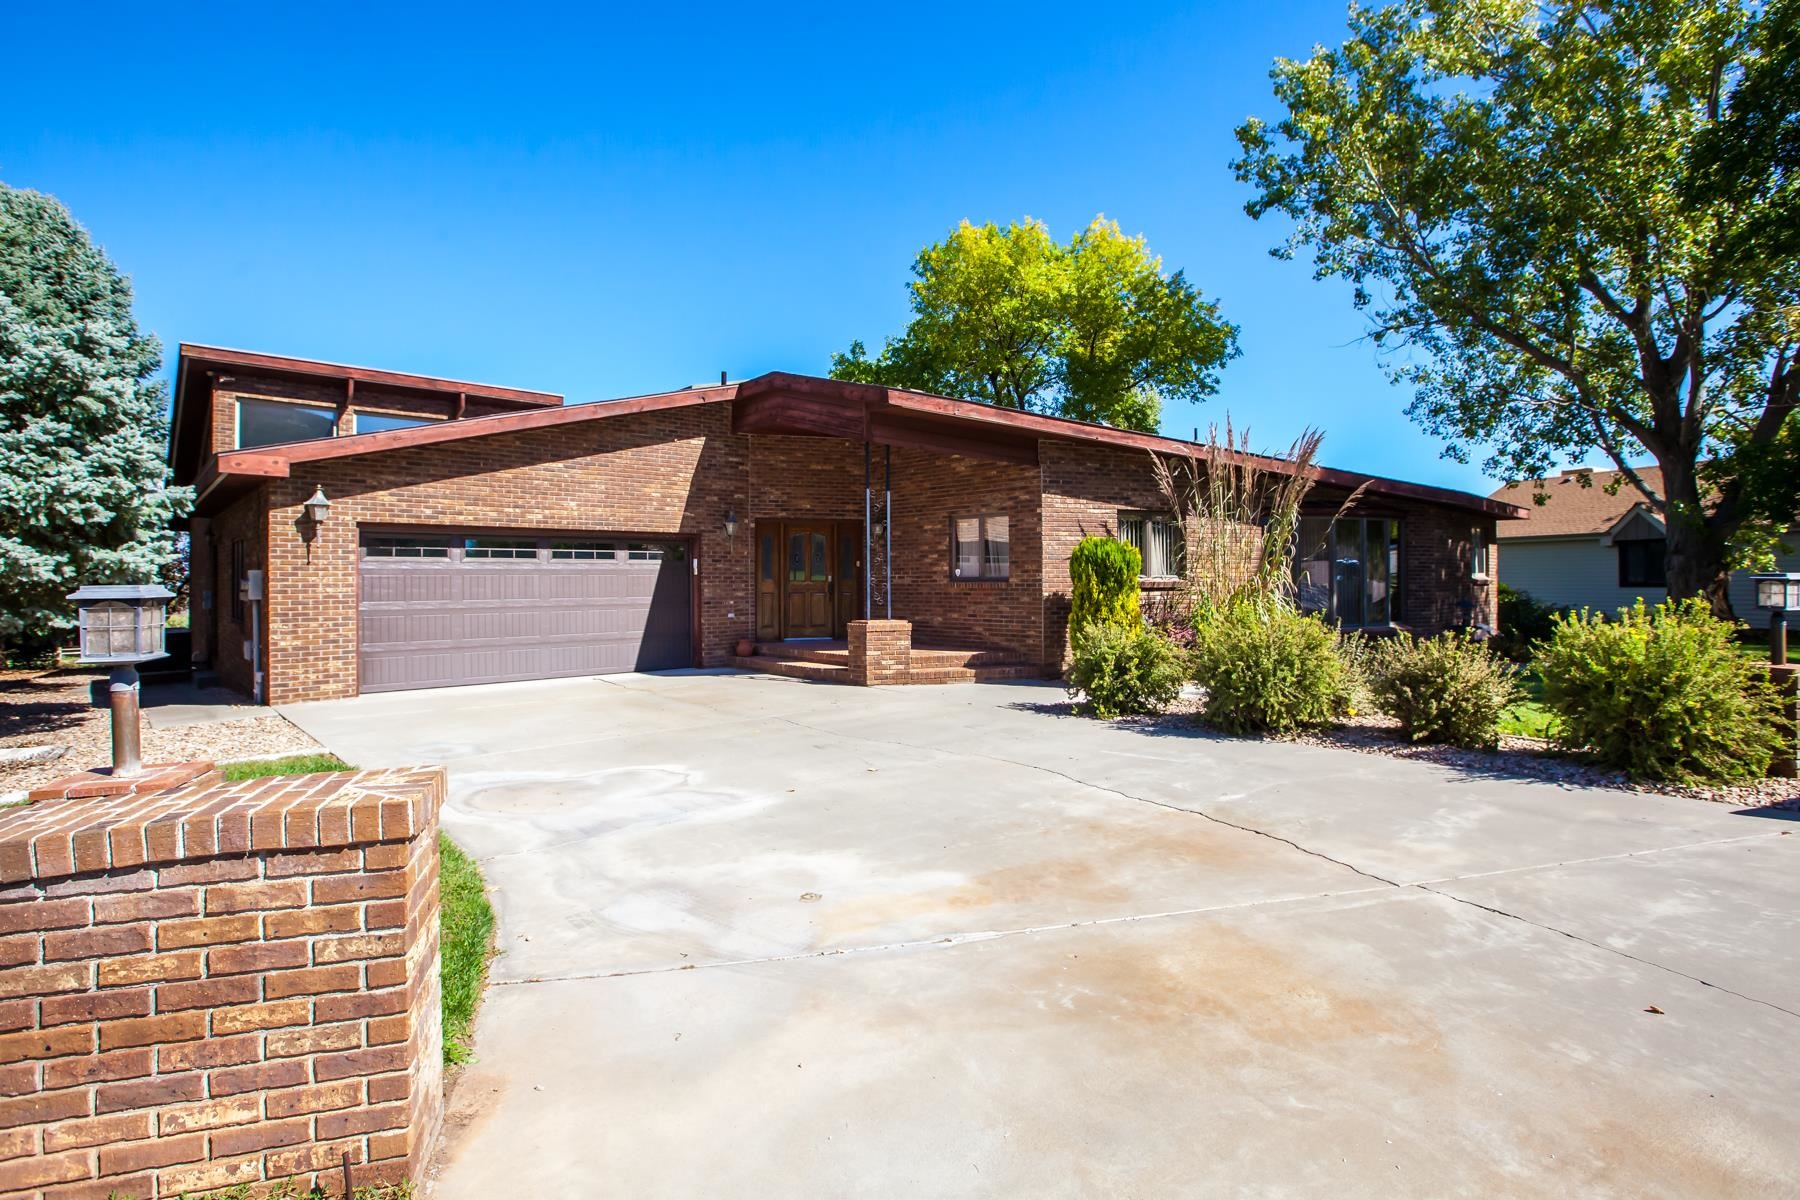 HUGE $100K PRICE REDUCTION! This quality built brick custom home boasts comfort and class with an opportunity to update a few things to reach it's full potential. Look out the large back windows onto the fairway of hole 6 at Tiara Rado Golf Course and see the city lights at night. Out the front windows you'll get views that are literally 'Monumental'. At just over 3,700 sq ft finished, there's potential to add even more finished space in the basement. Park the golf cart in the basement down a ramp with an overhead door. This property is close to hiking, biking and rafting opportunities while only being a few minutes from shopping, restaurants and other amenities. All furnishings can stay.   Laundry hook ups in upper lever bedroom as well.